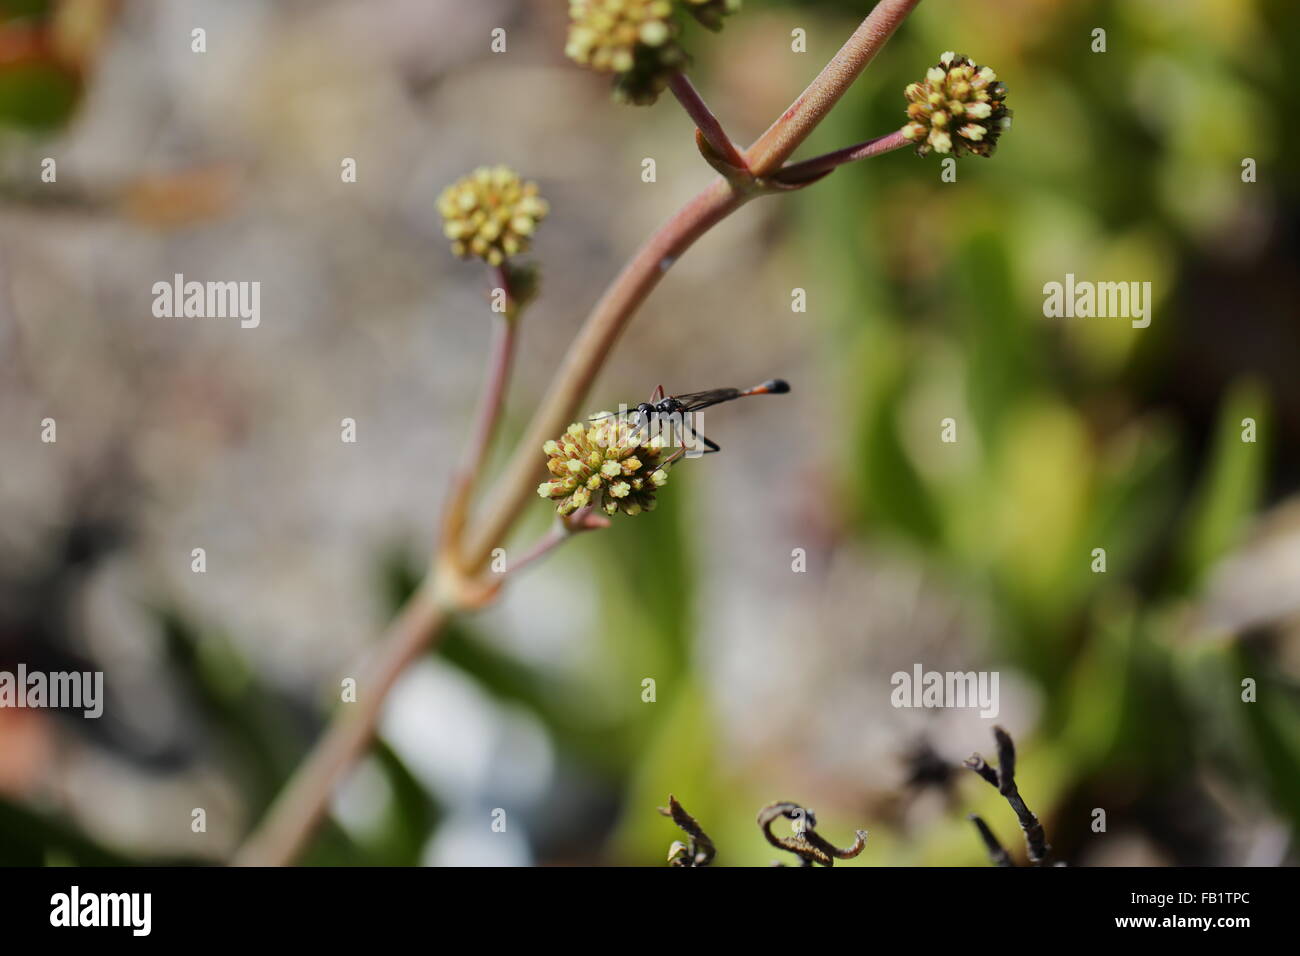 Wasp on the inflorescence of crassula species Stock Photo